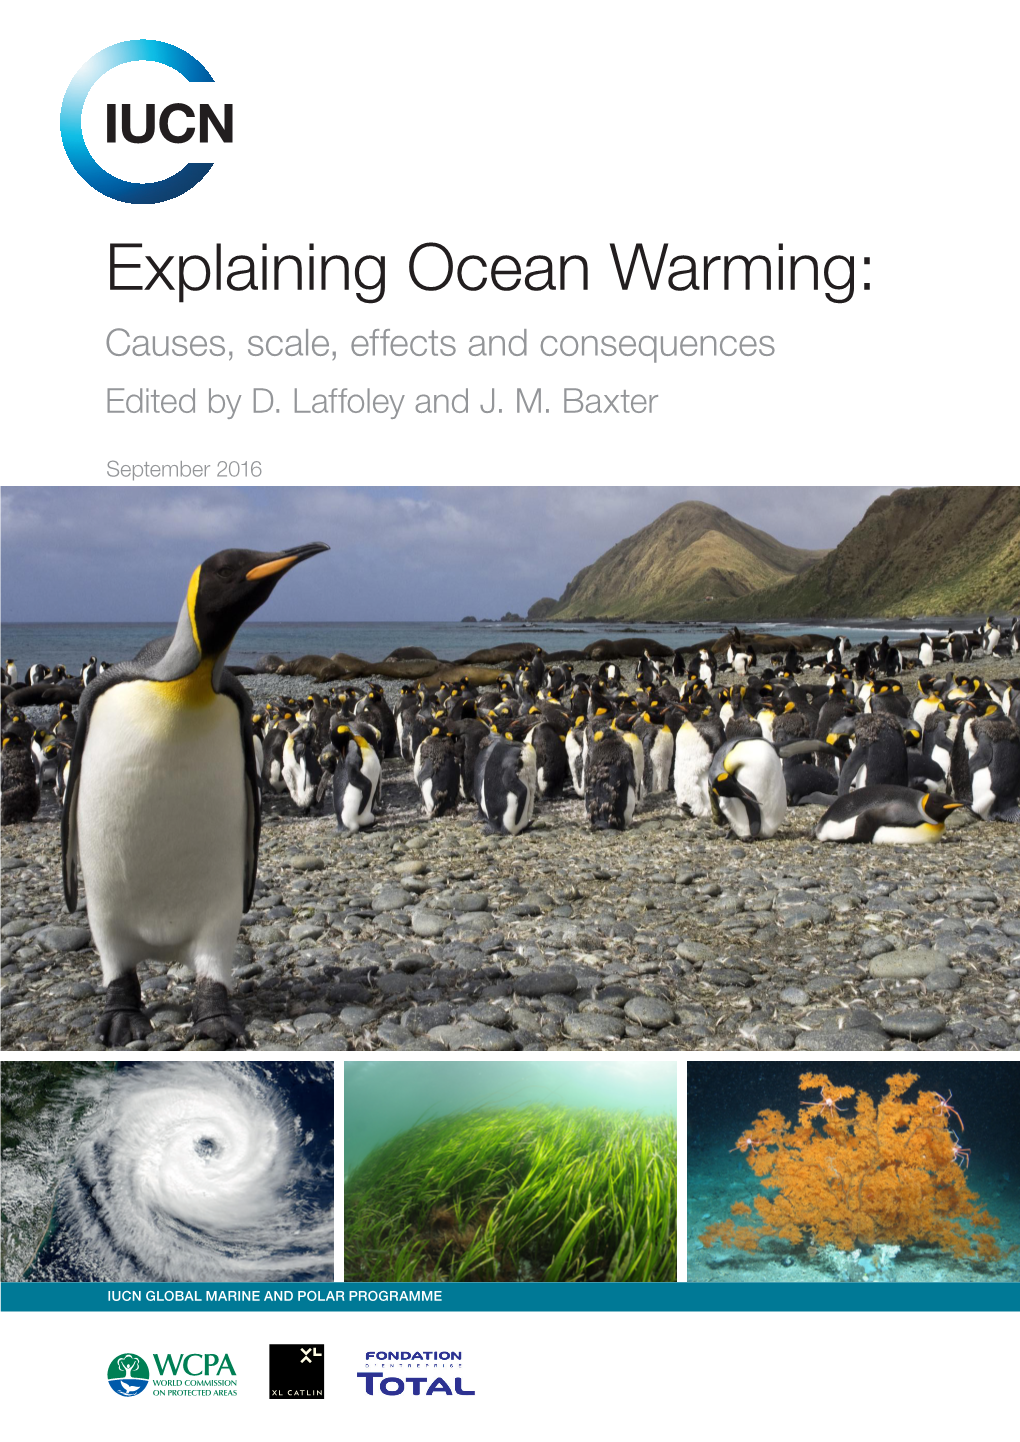 Explaining Ocean Warming: Causes, Scale, Effects and Consequences Edited by D